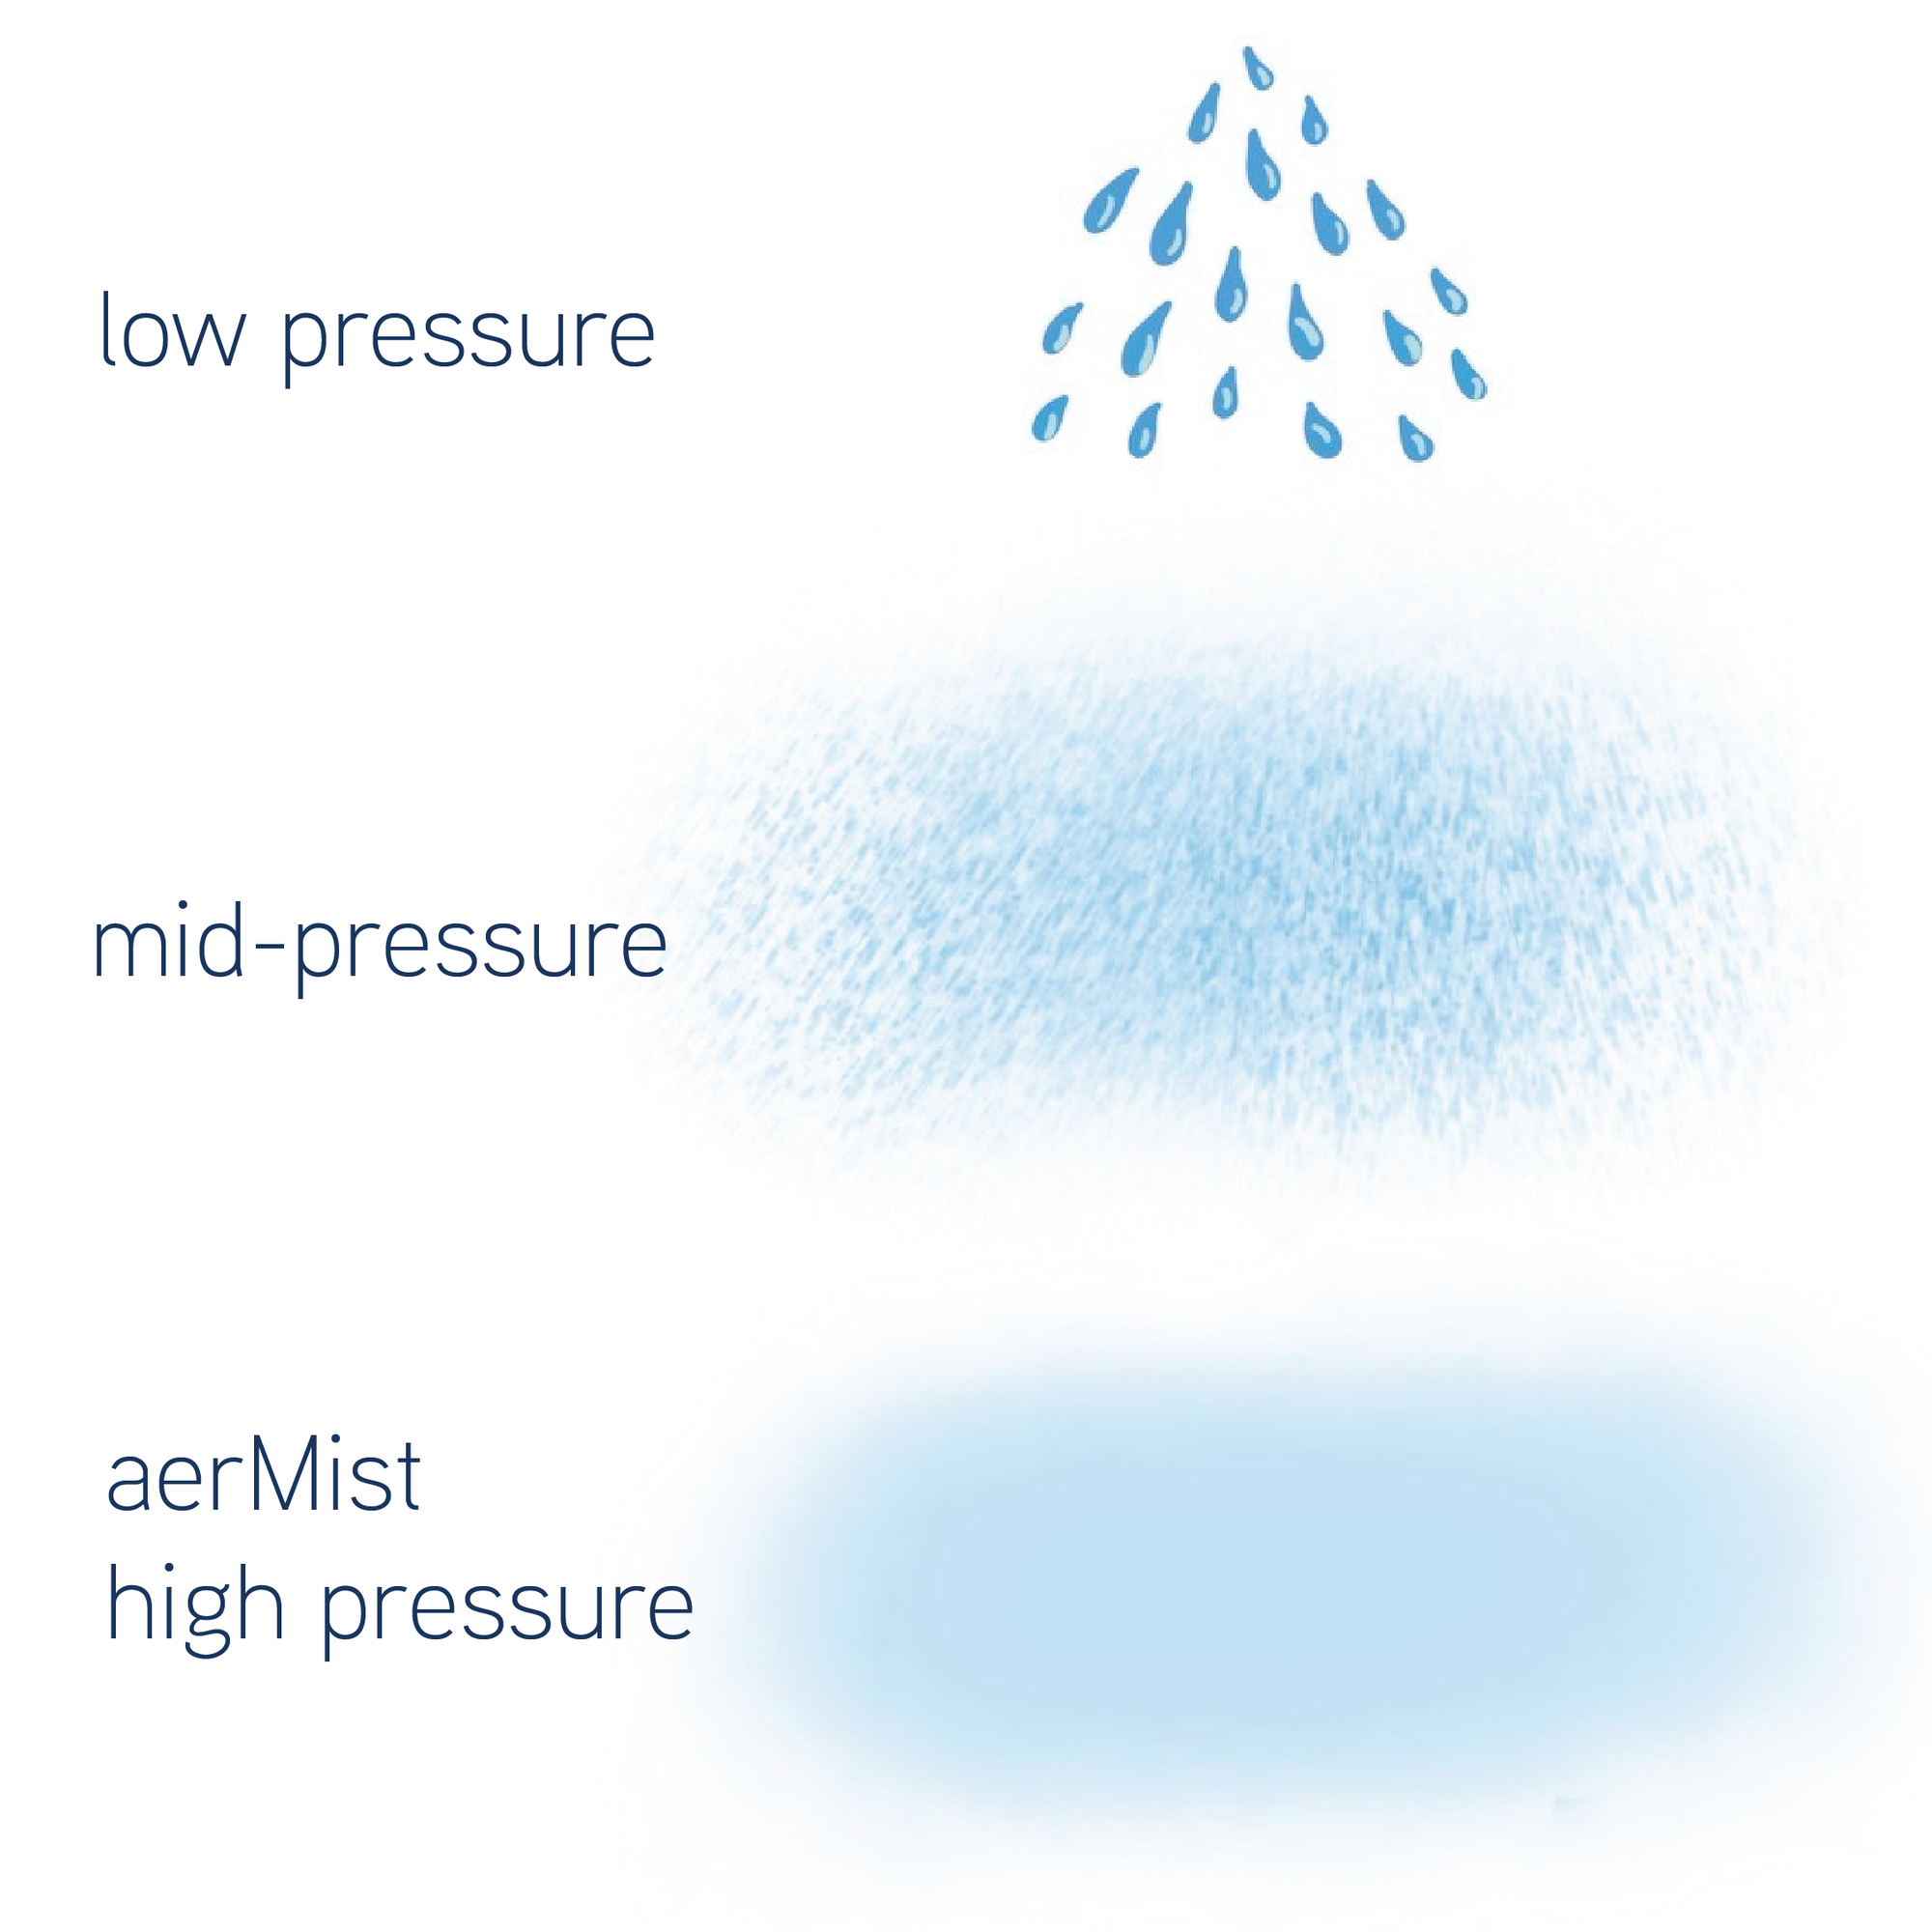 aerMist high pressure misting system creates superfine water mist that will not wet people and surfaces while low and mid pressure systems generate larger water droplets that leave people and surfaces wet